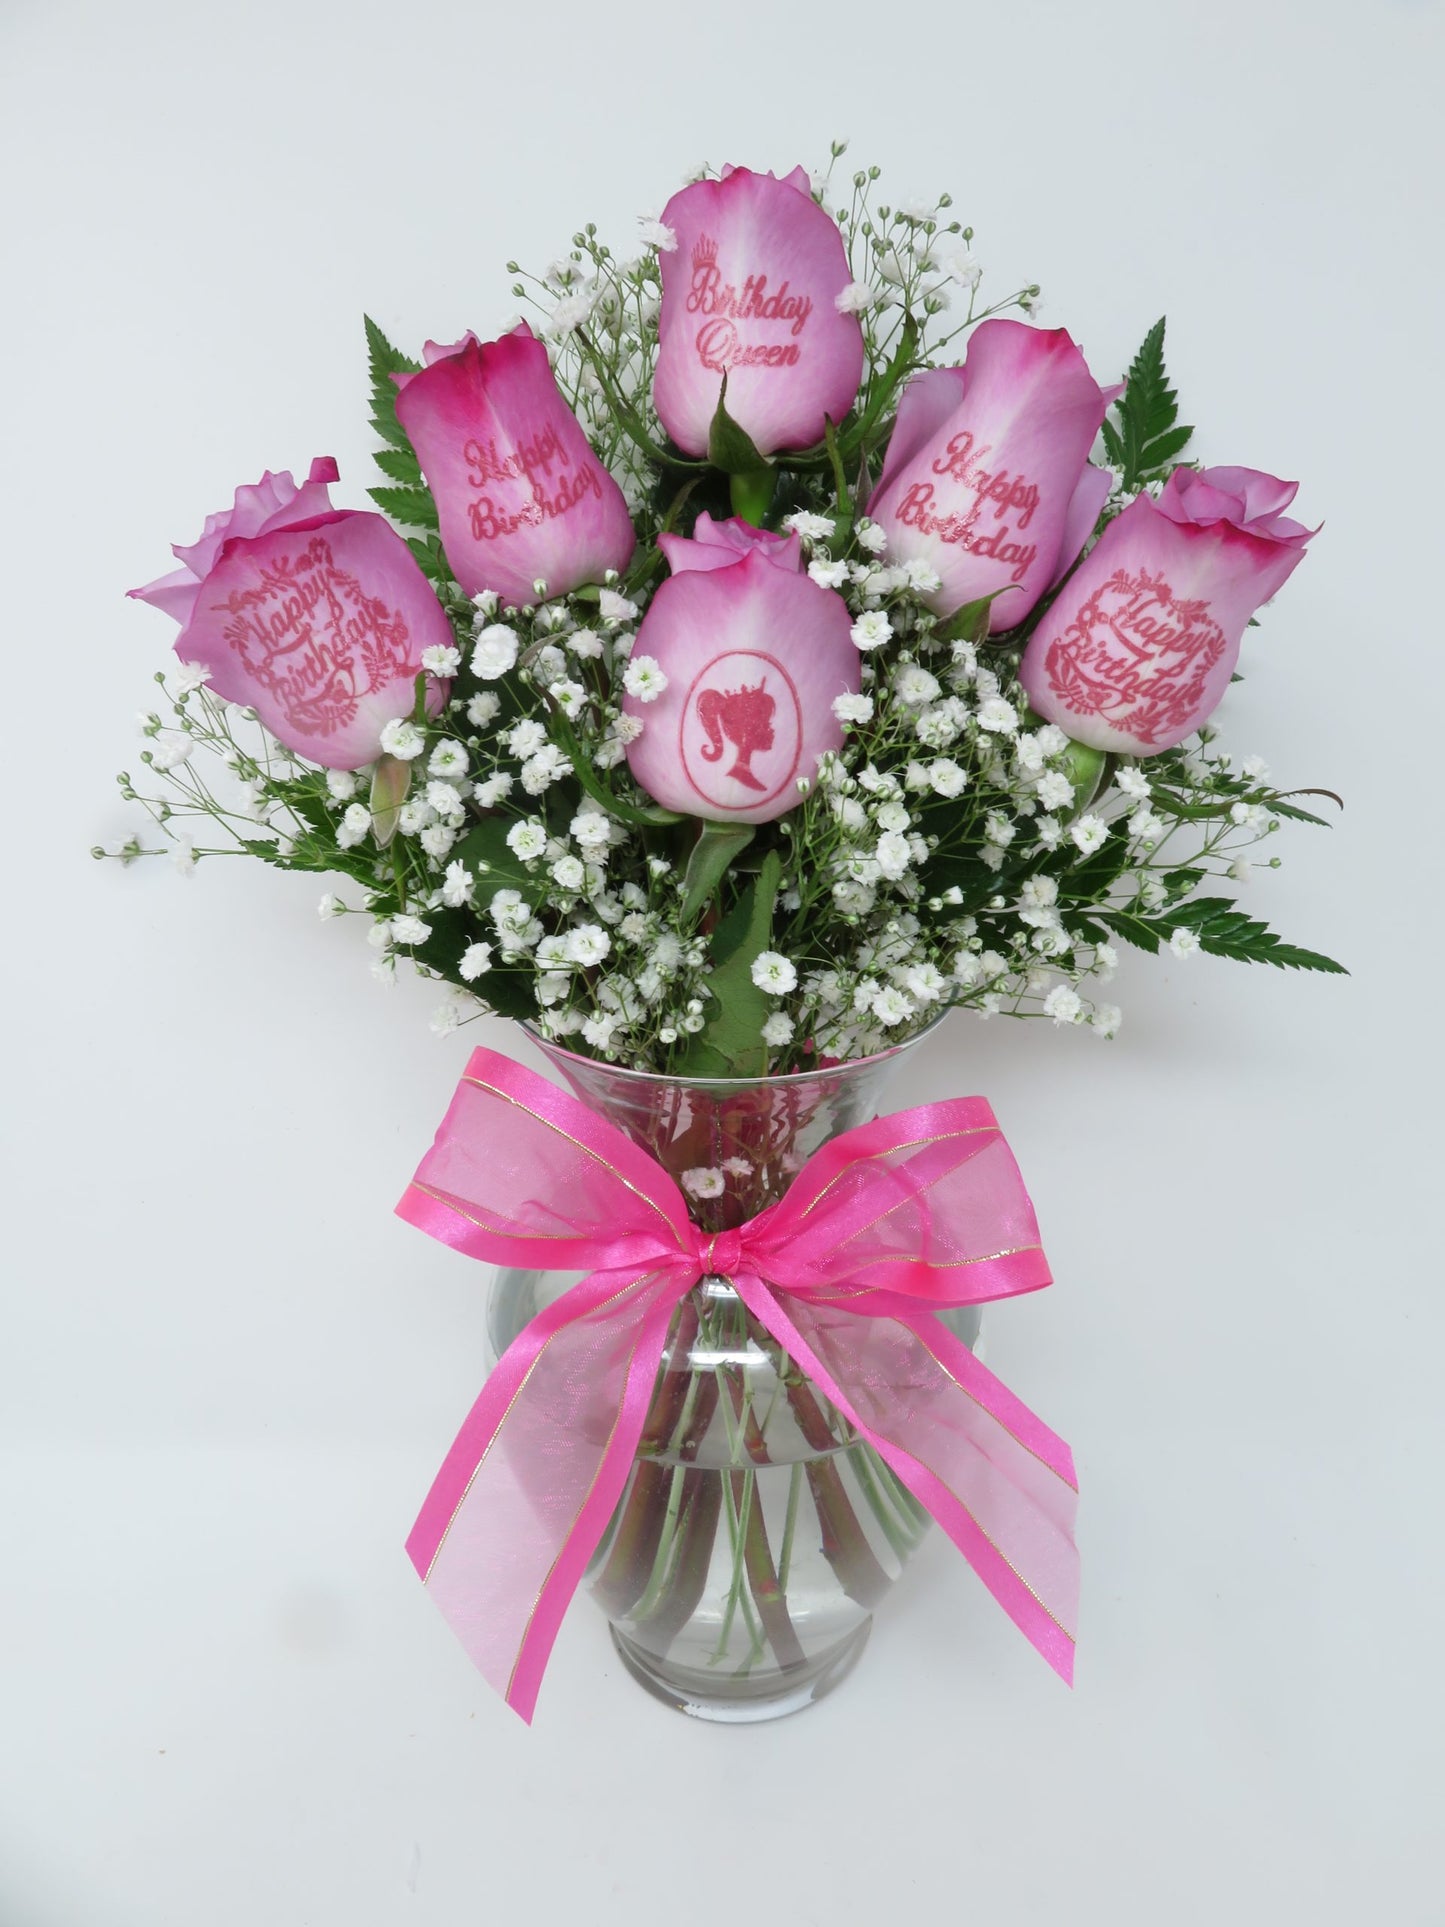 6 Pink Roses with Happy Birthday for a Queen!